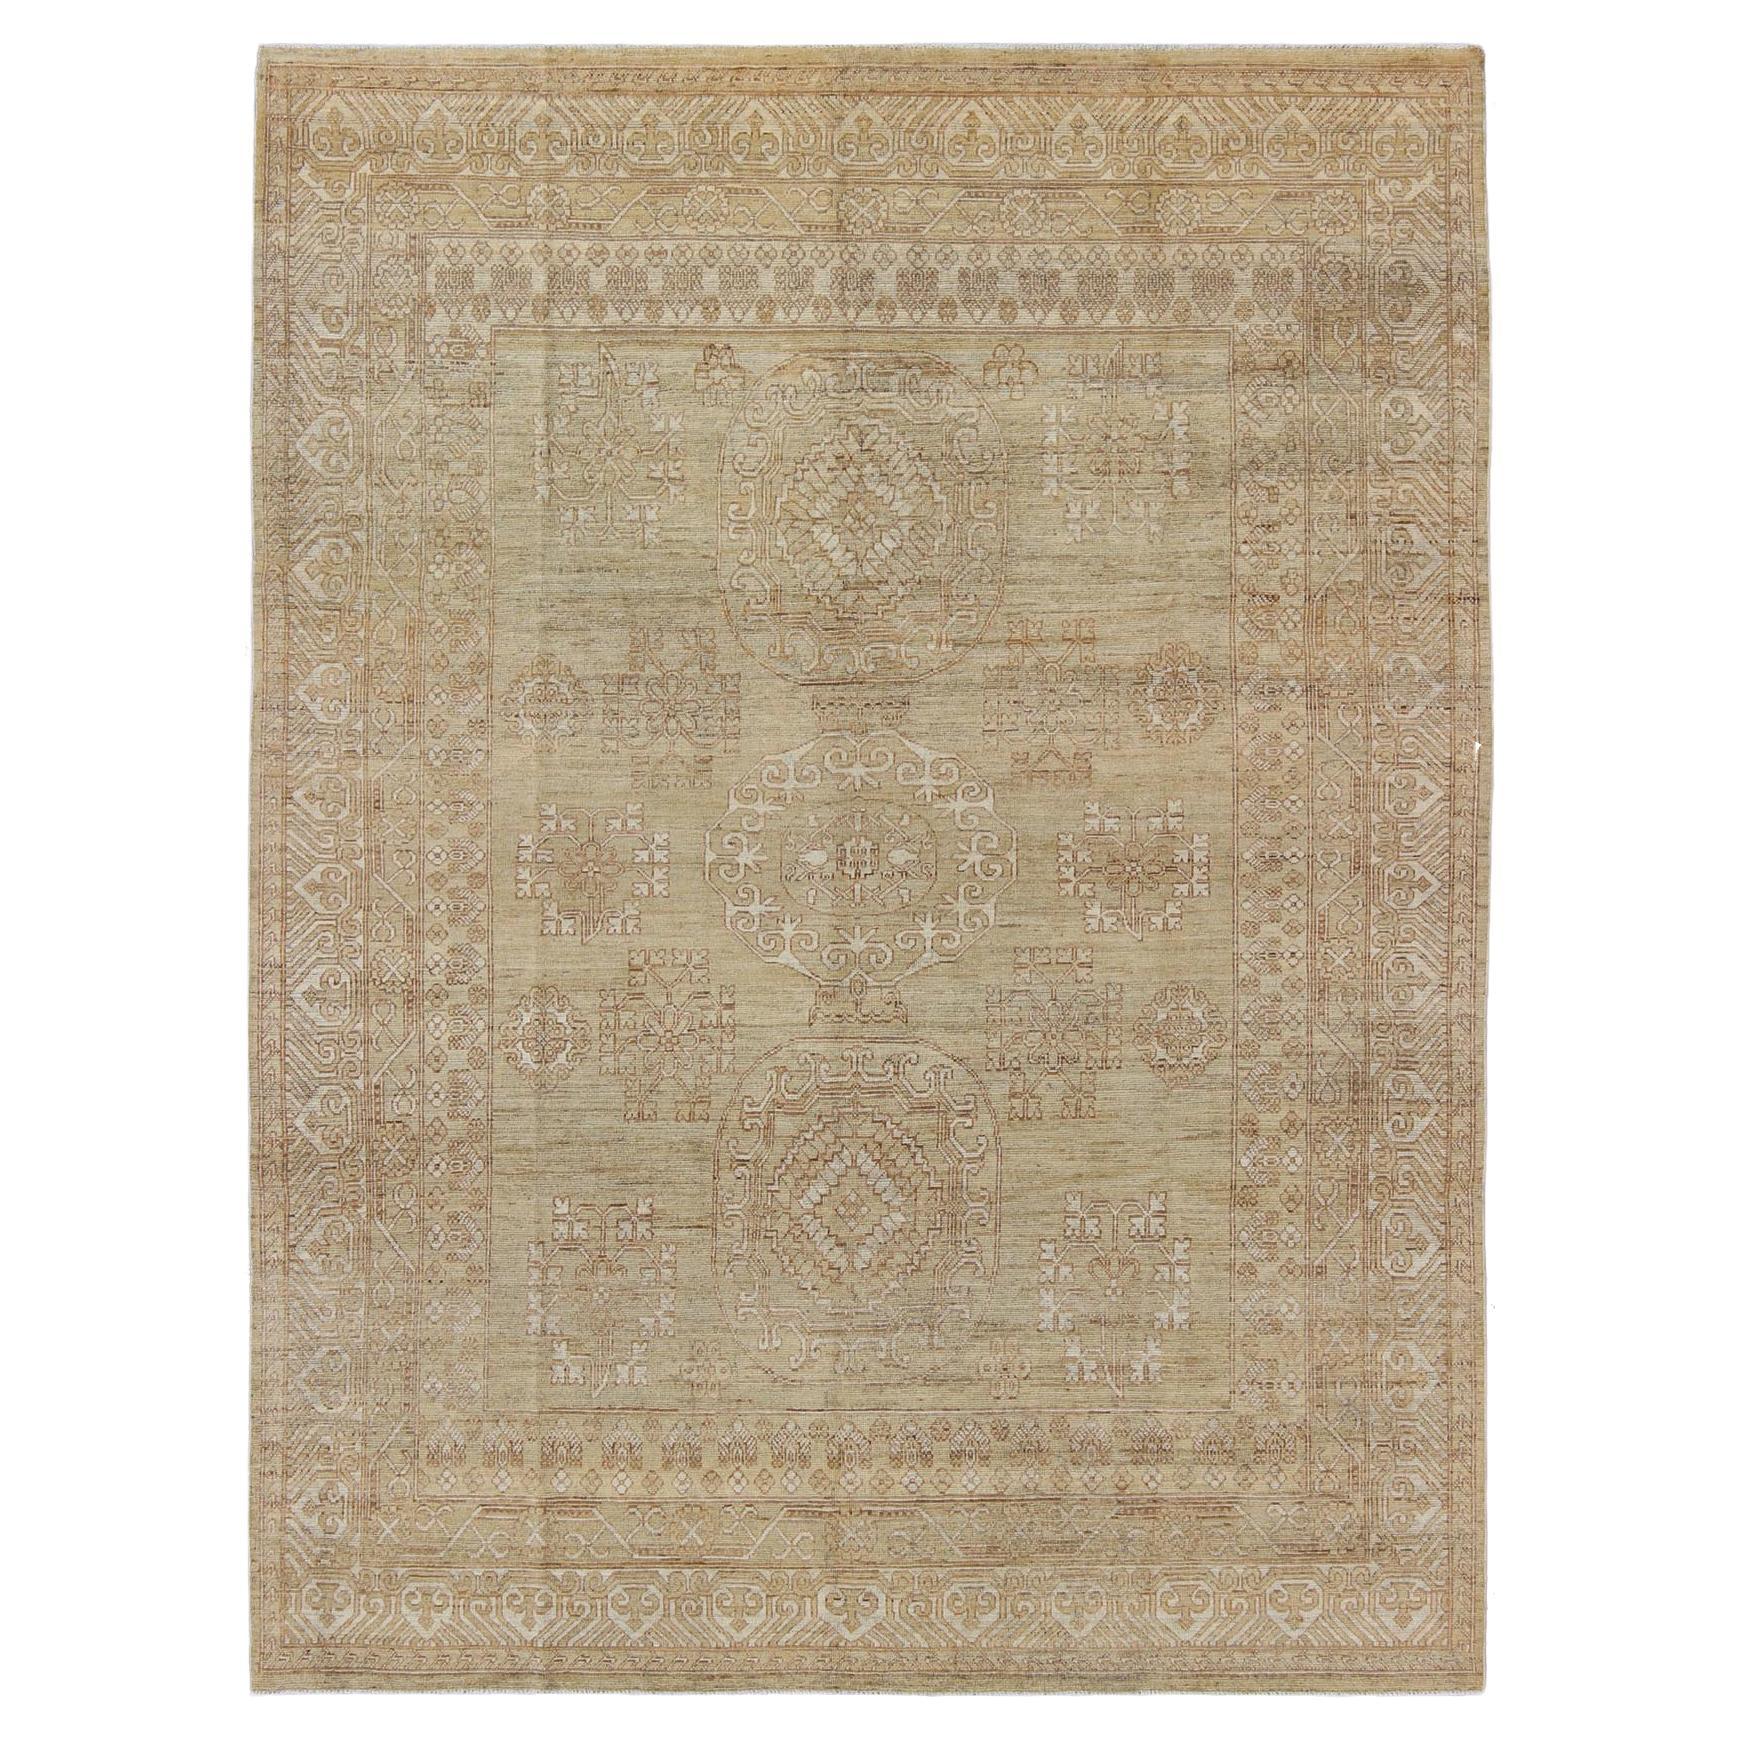 Khotan Design Rug with All-Over Geometric Pattern in Light Brown and Green's For Sale